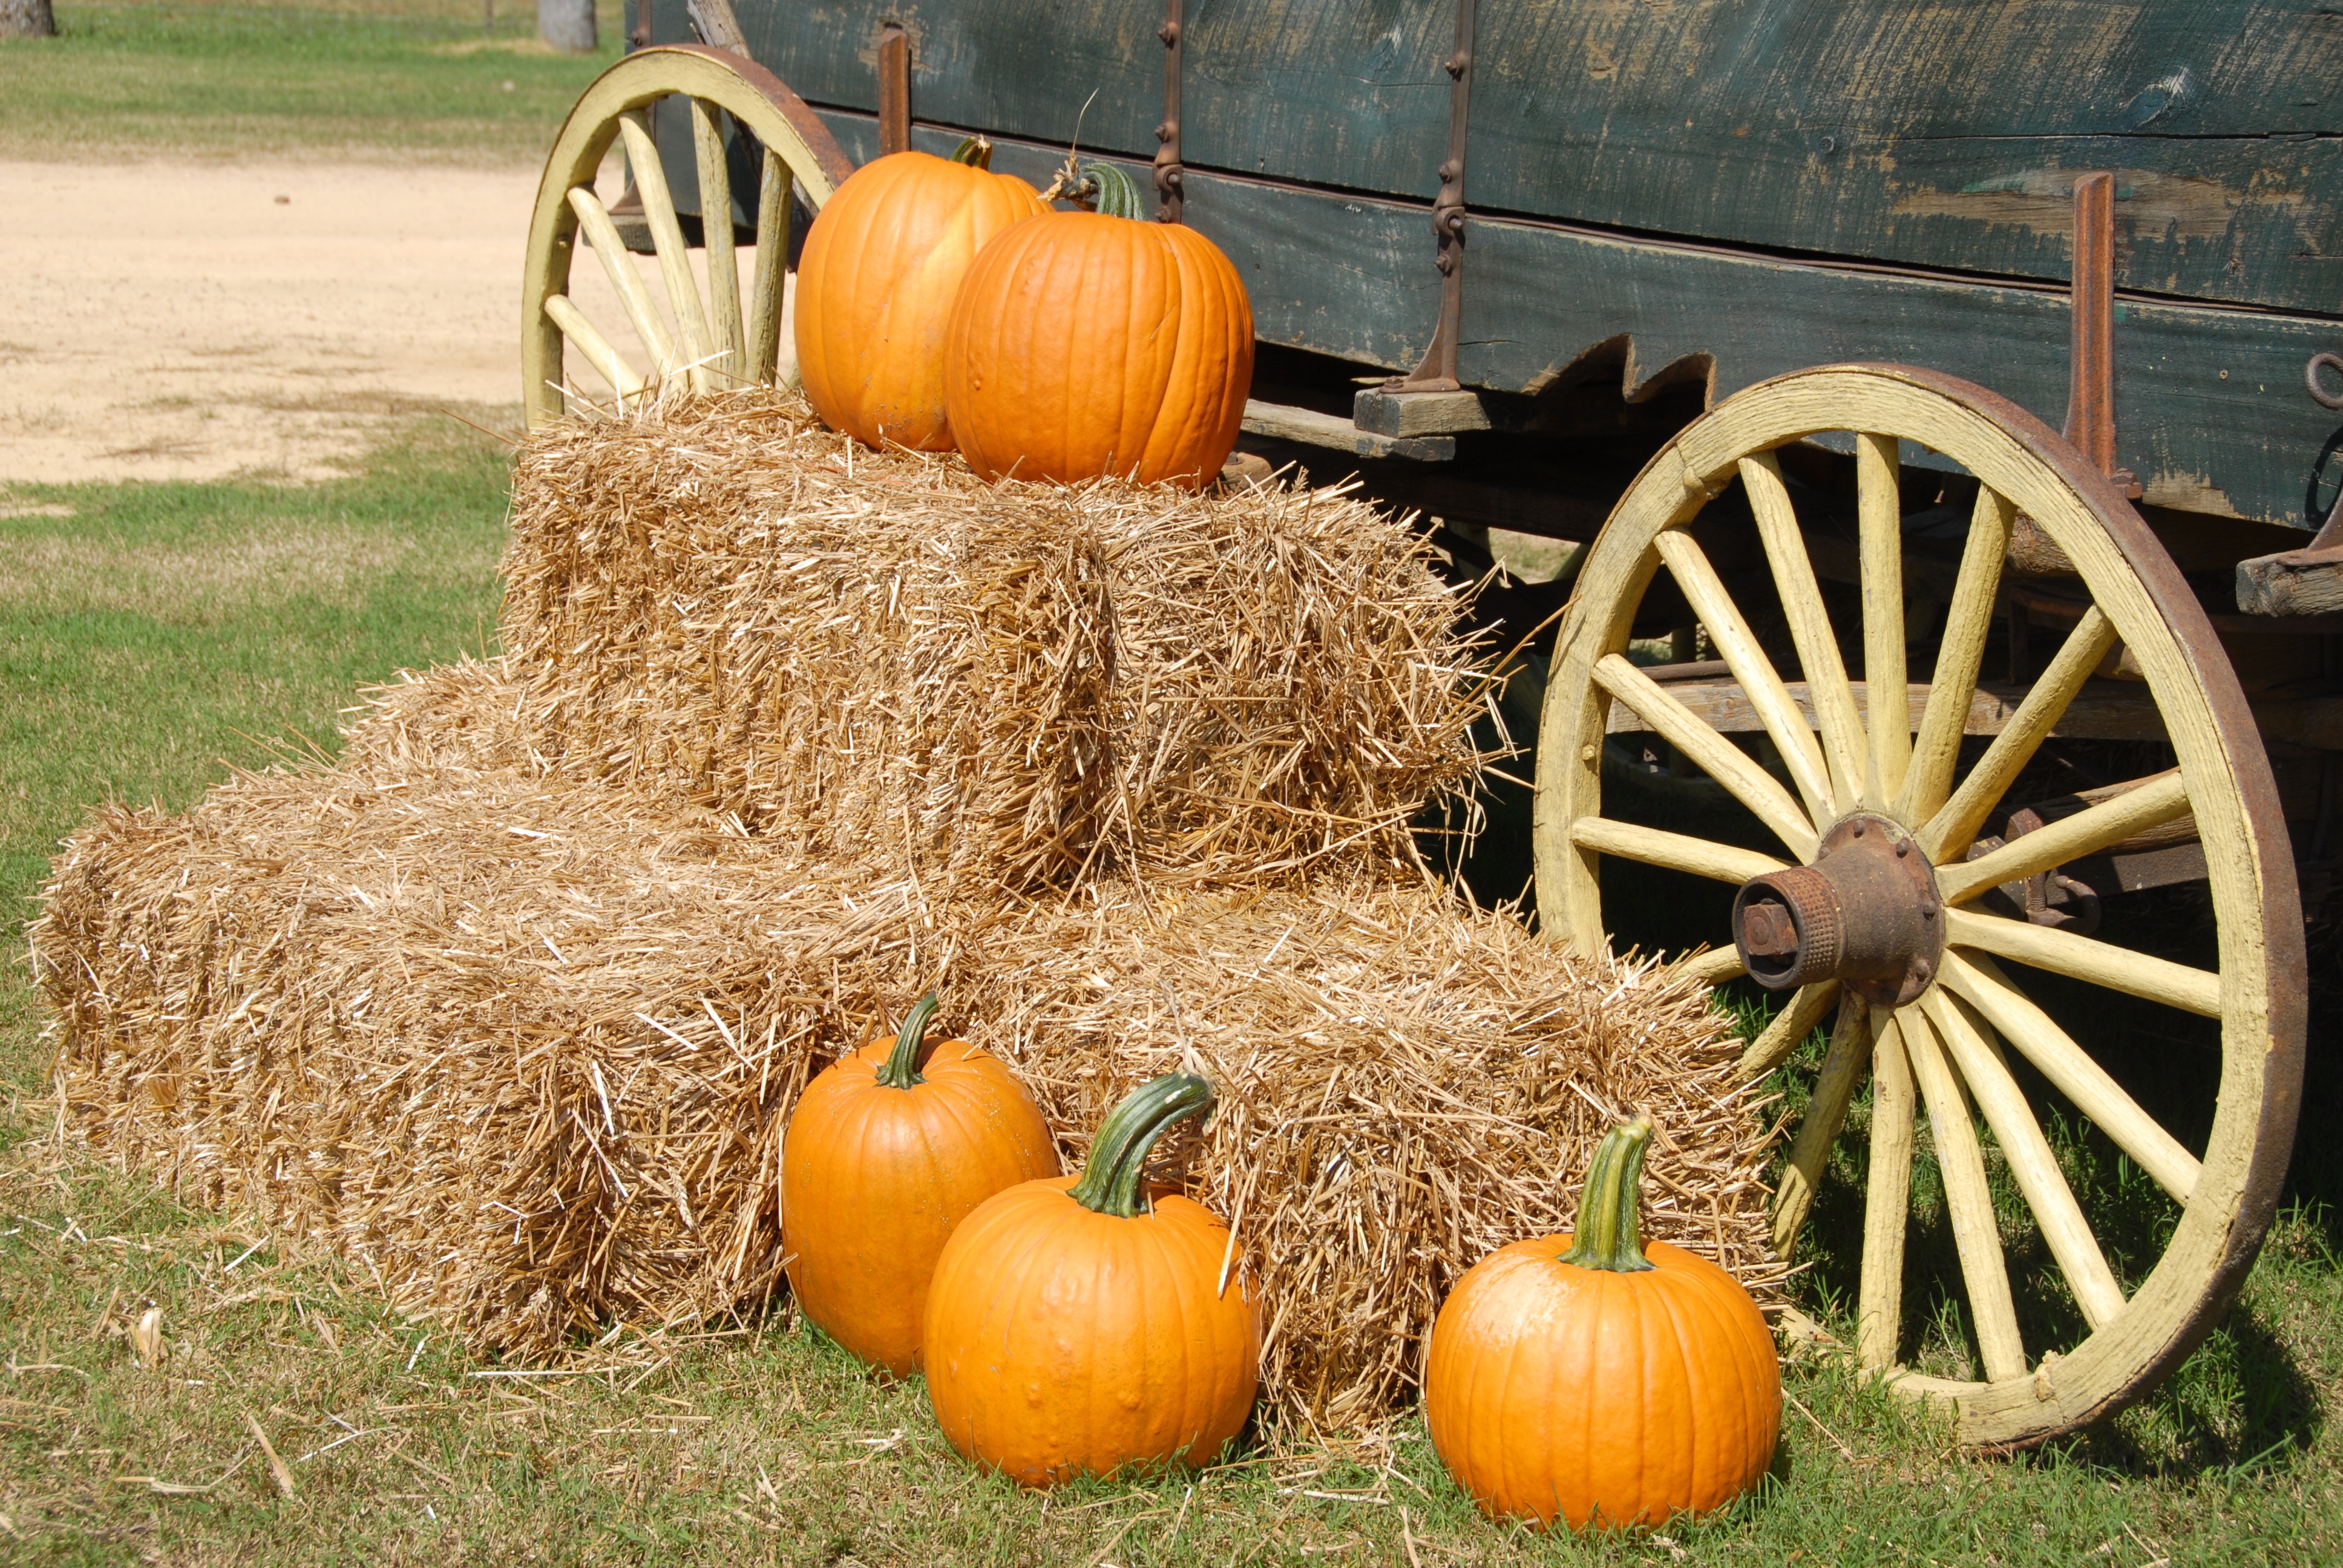 A pumpkin lies on the haystack next to the cart